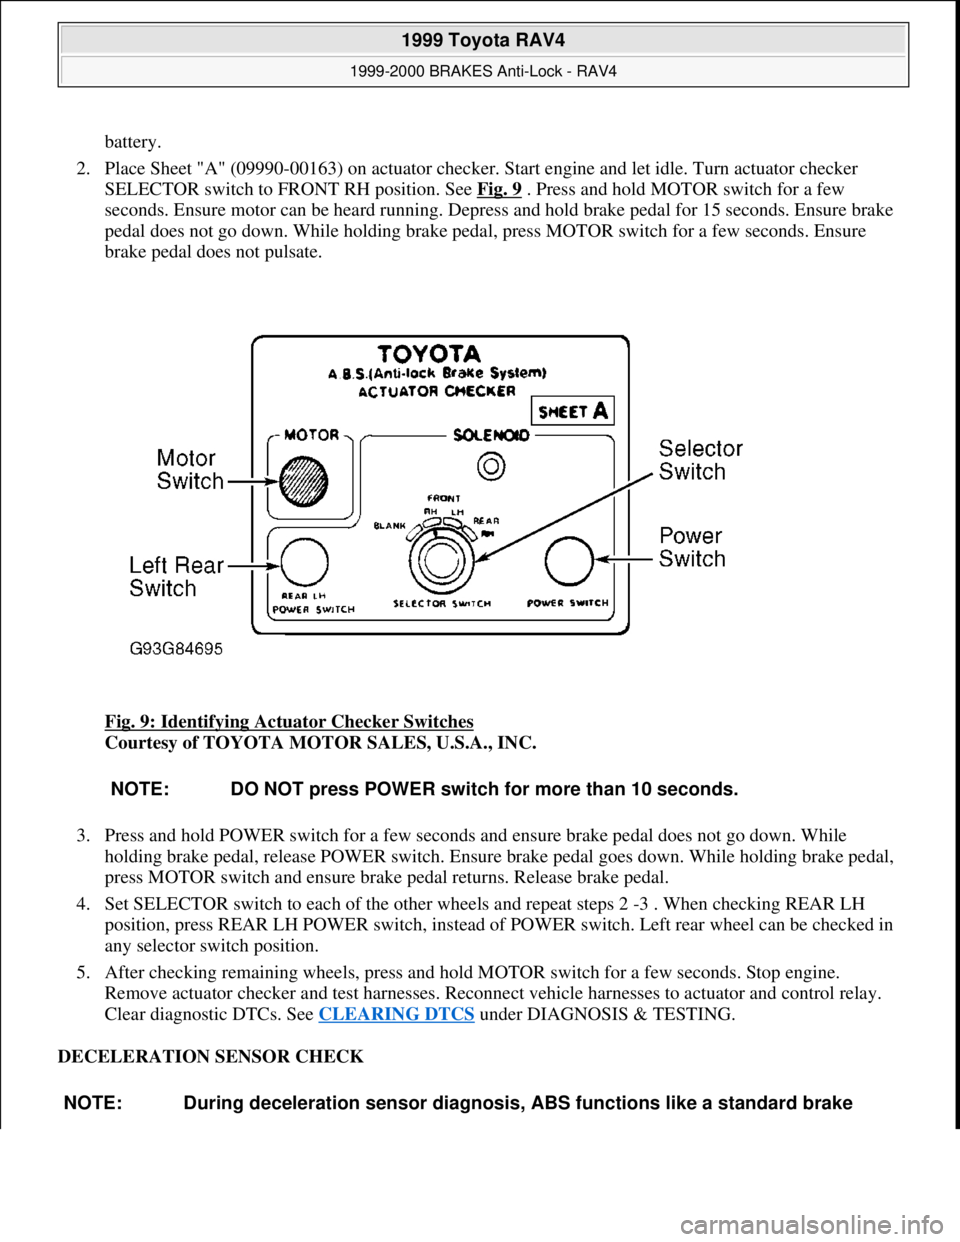 TOYOTA RAV4 1996  Service Repair Manual battery.  
2. Place Sheet "A" (09990-00163) on actuator checker. Start engine and let idle. Turn actuator checker 
SELECTOR switch to FRONT RH position. See Fig. 9
 . Press and hold MOTOR switch for a